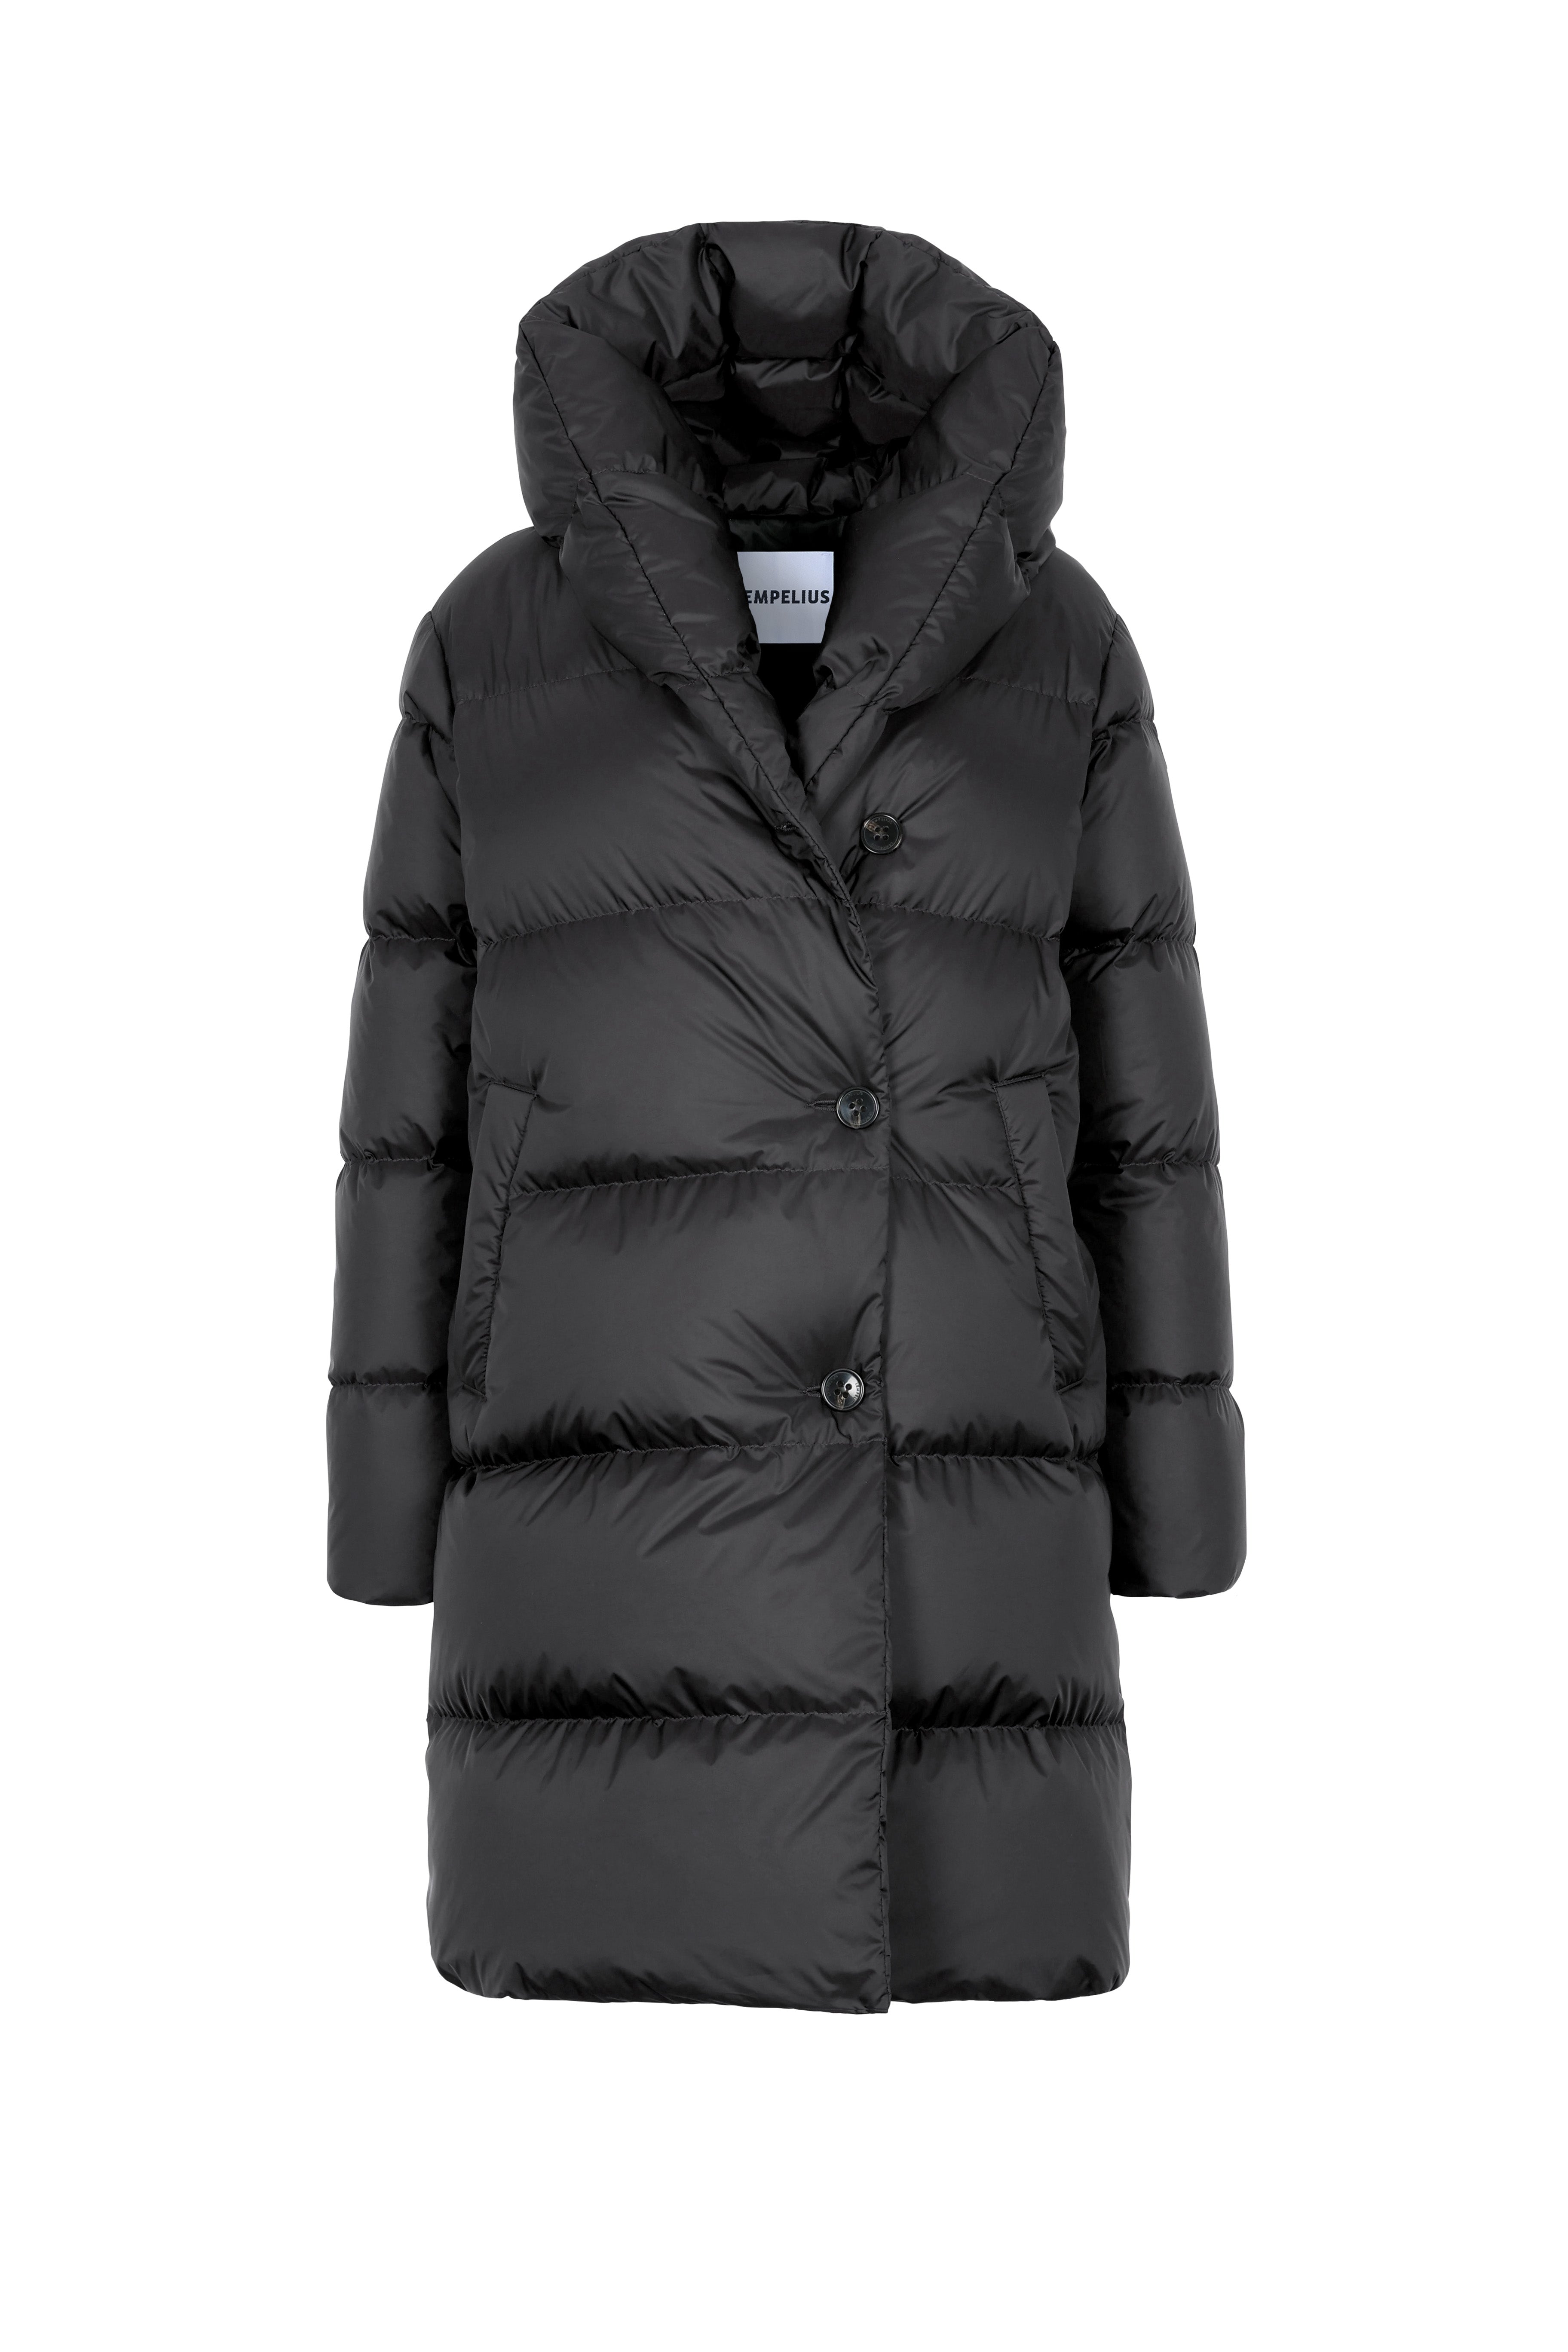 fitted mid lenght Lempelius down coat in black